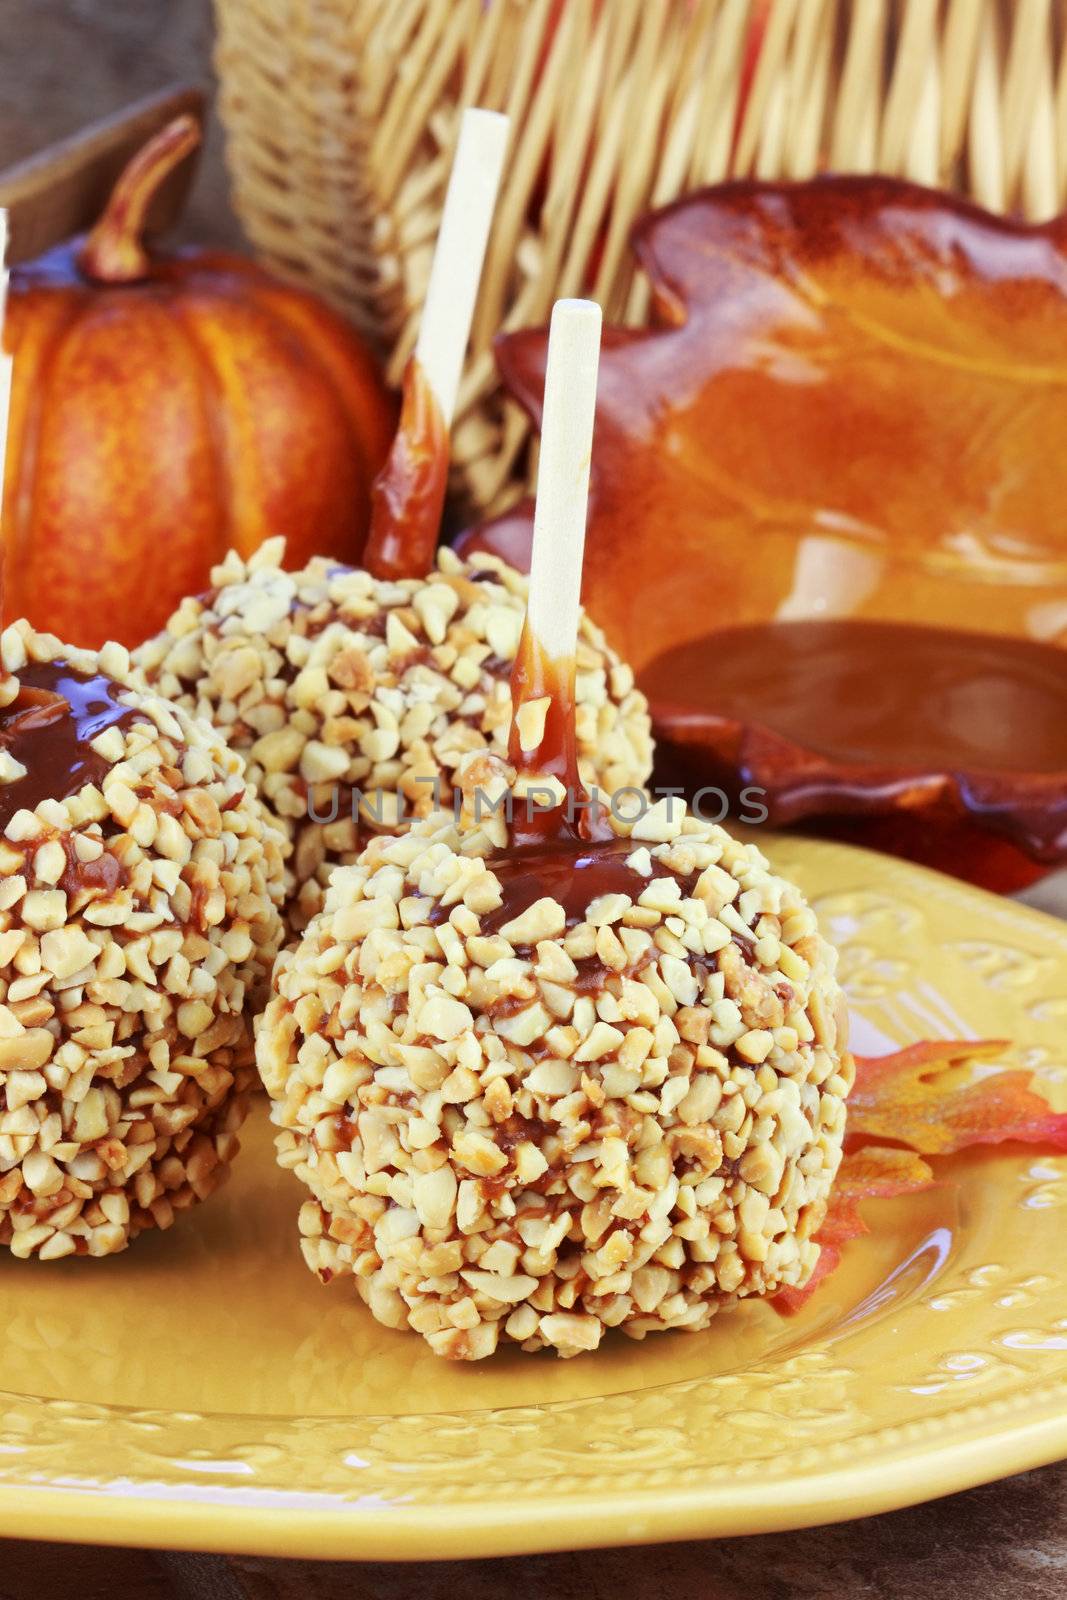 Candy apples with caramel sauce and a basket of apples in the background.